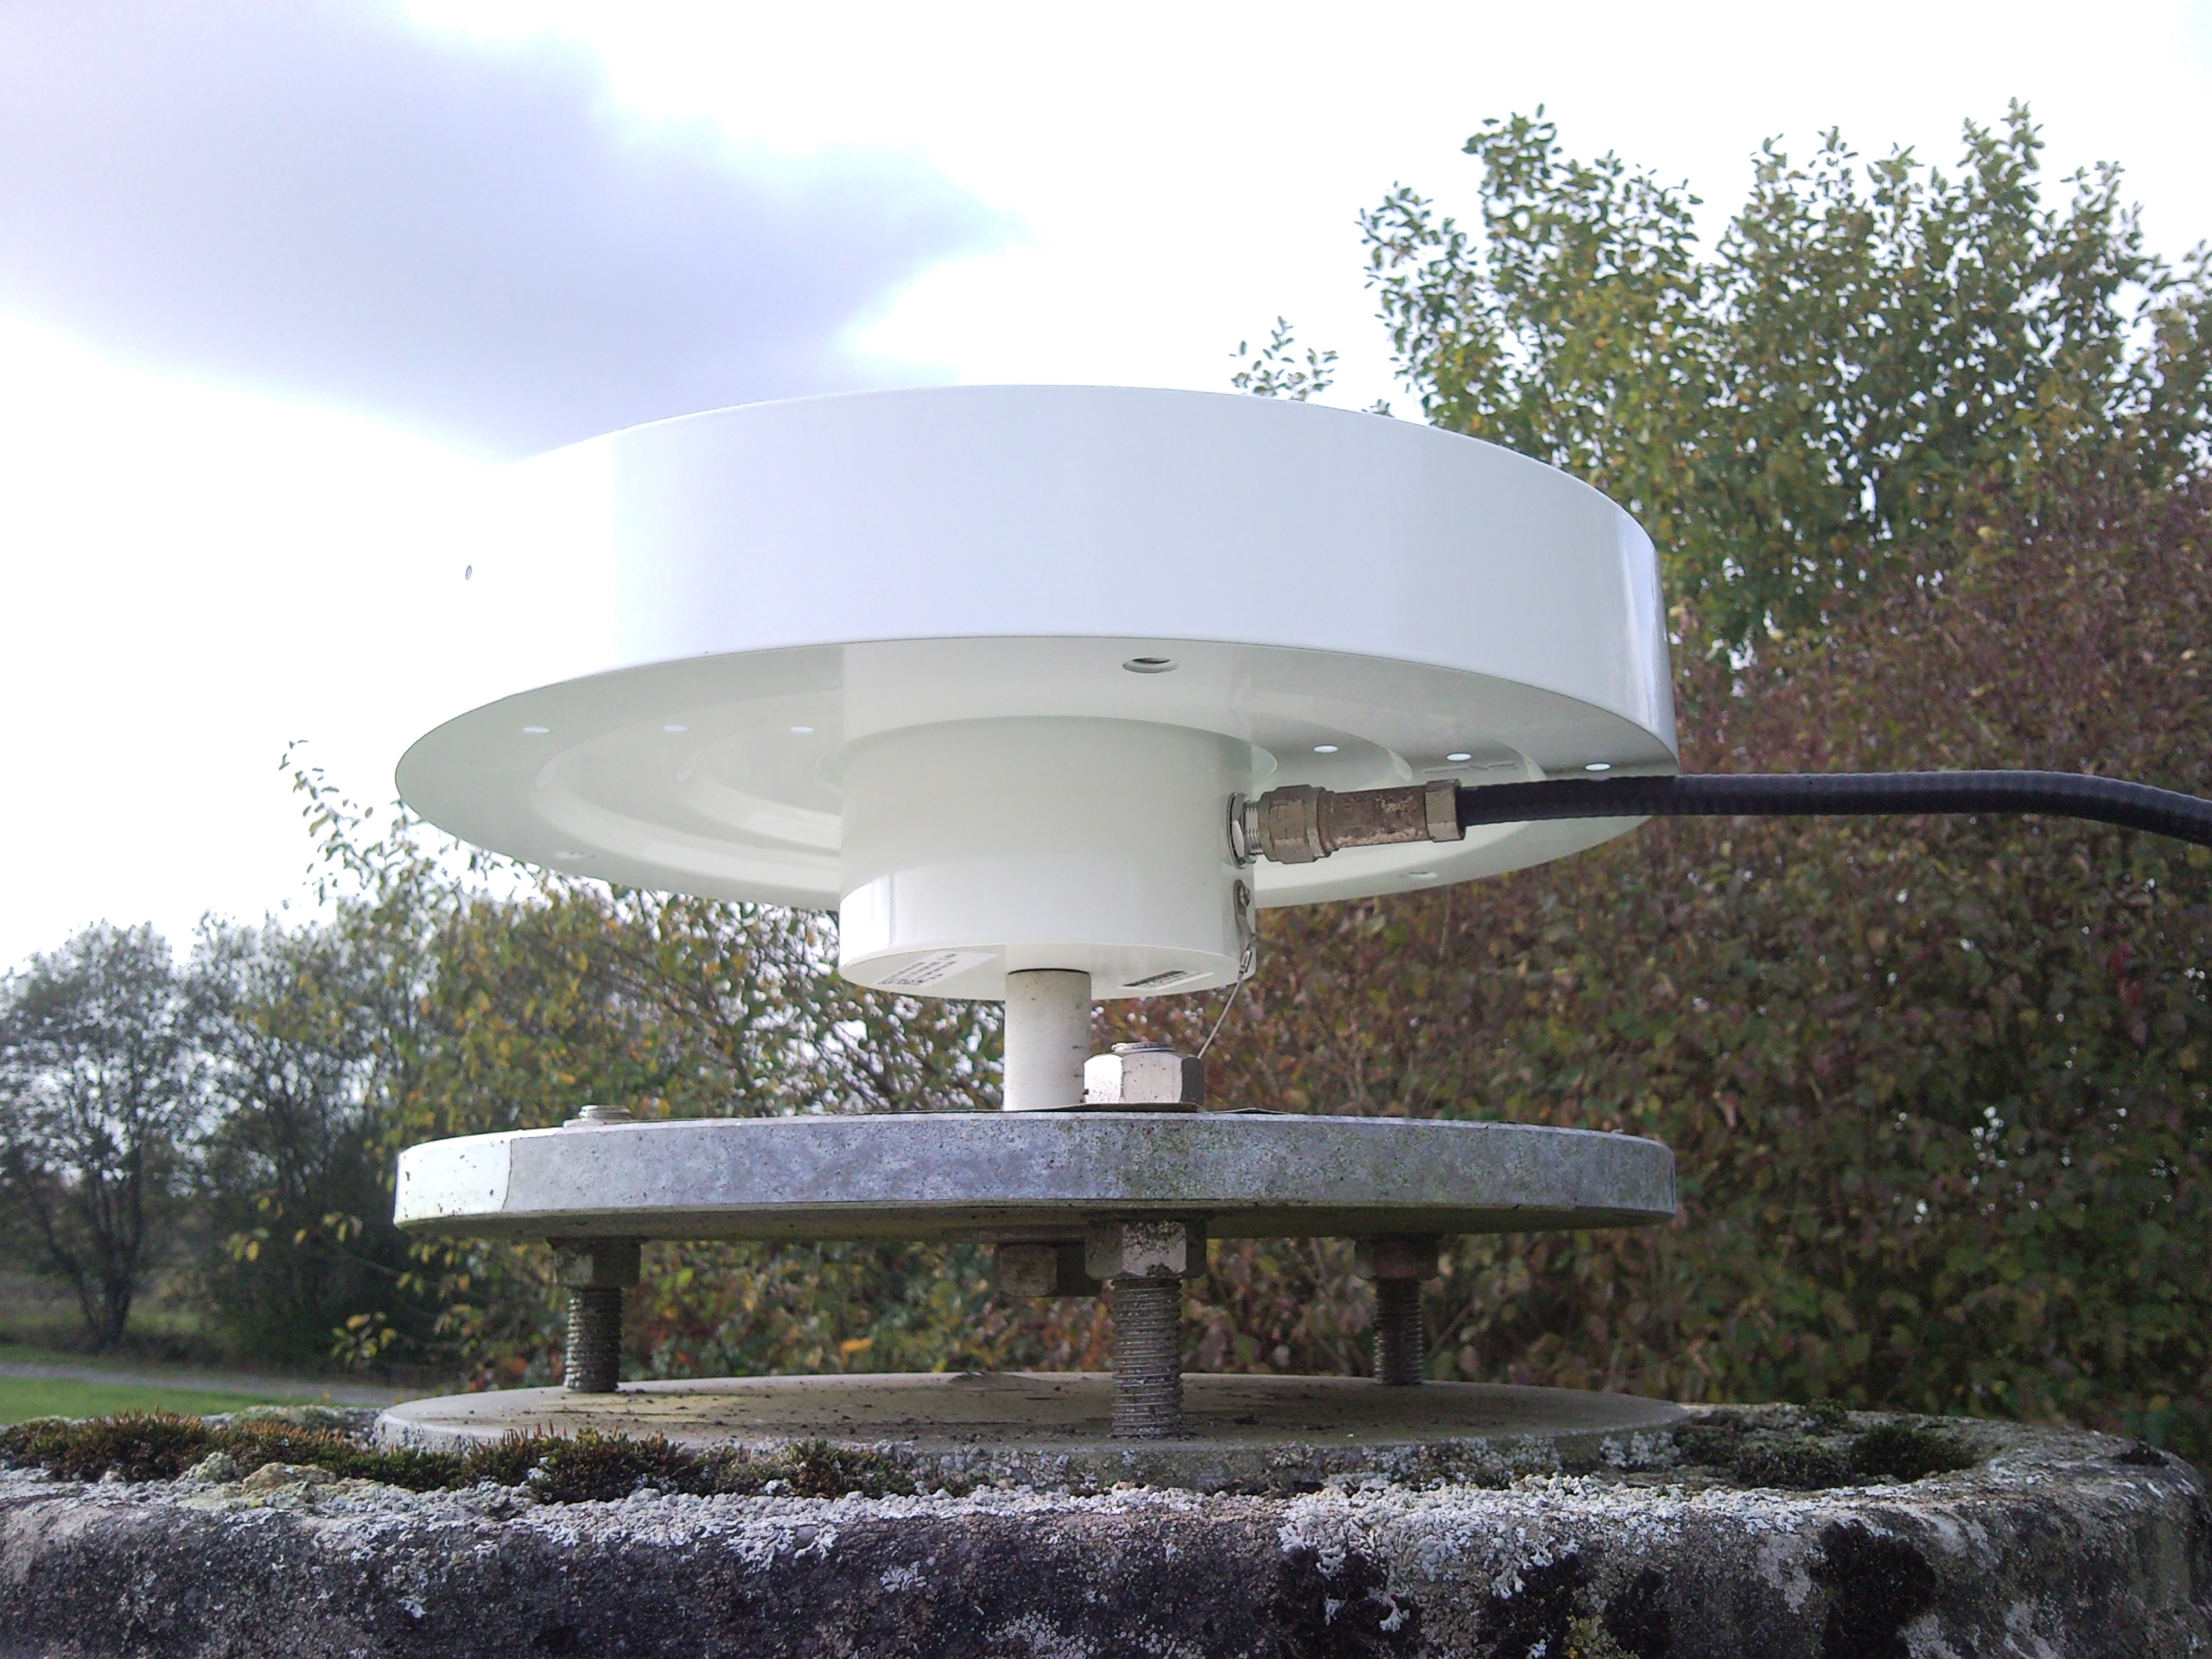 images/download/attachments/31224612/New_GNSS_Antenna_Close-up_1-version-1-modificationdate-1600265055190-api-v2.jpg